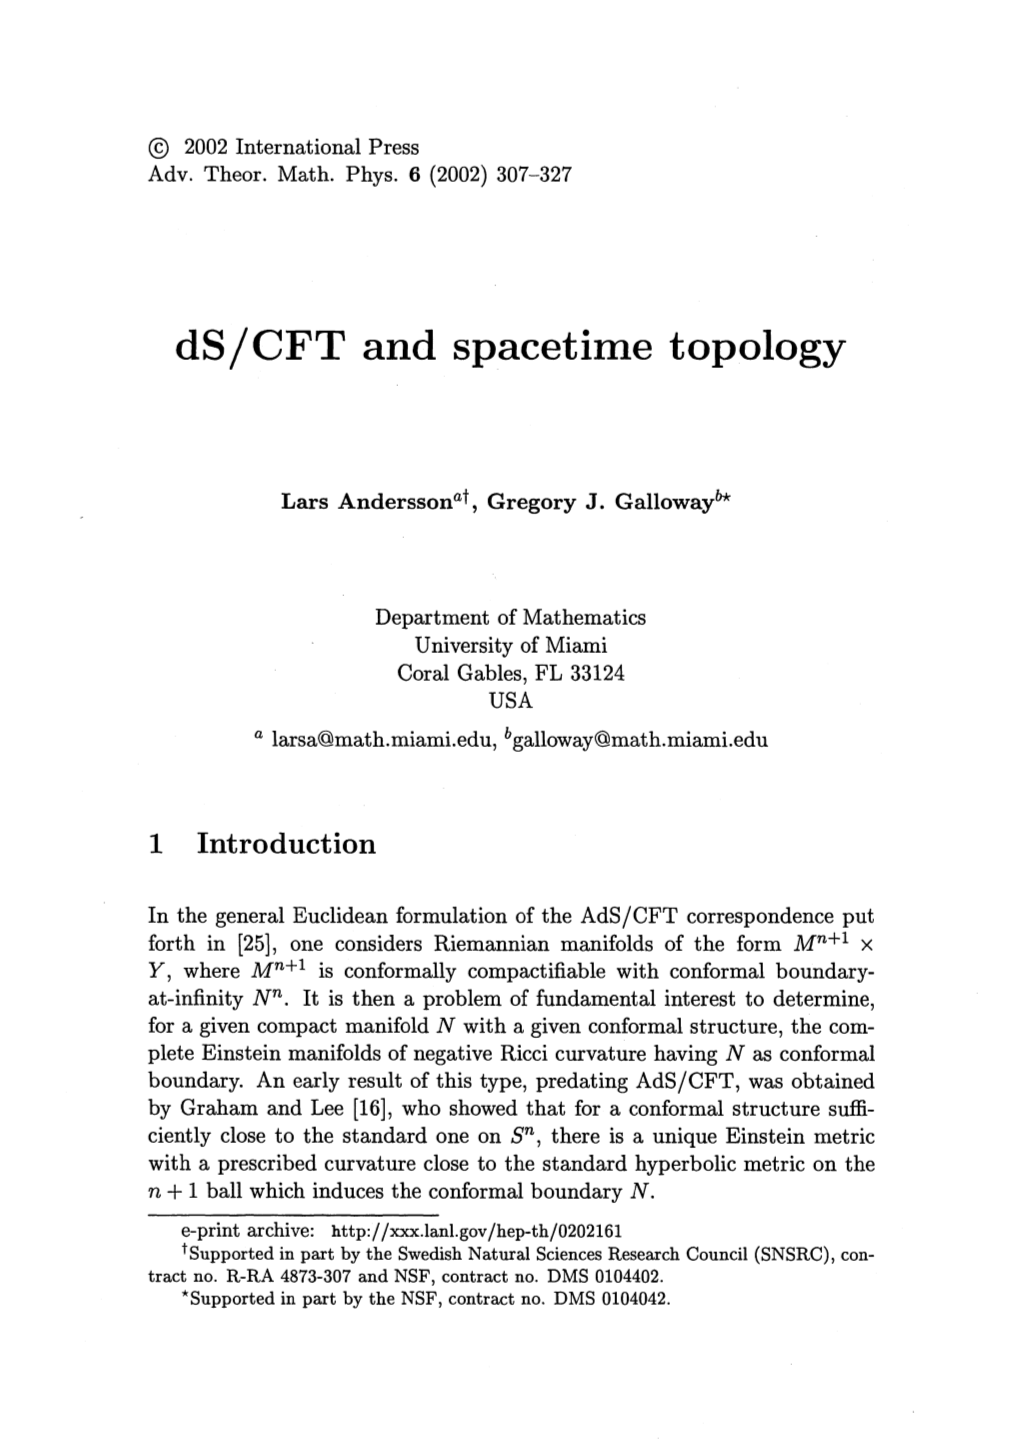 Ds/CFT and Spacetime Topology